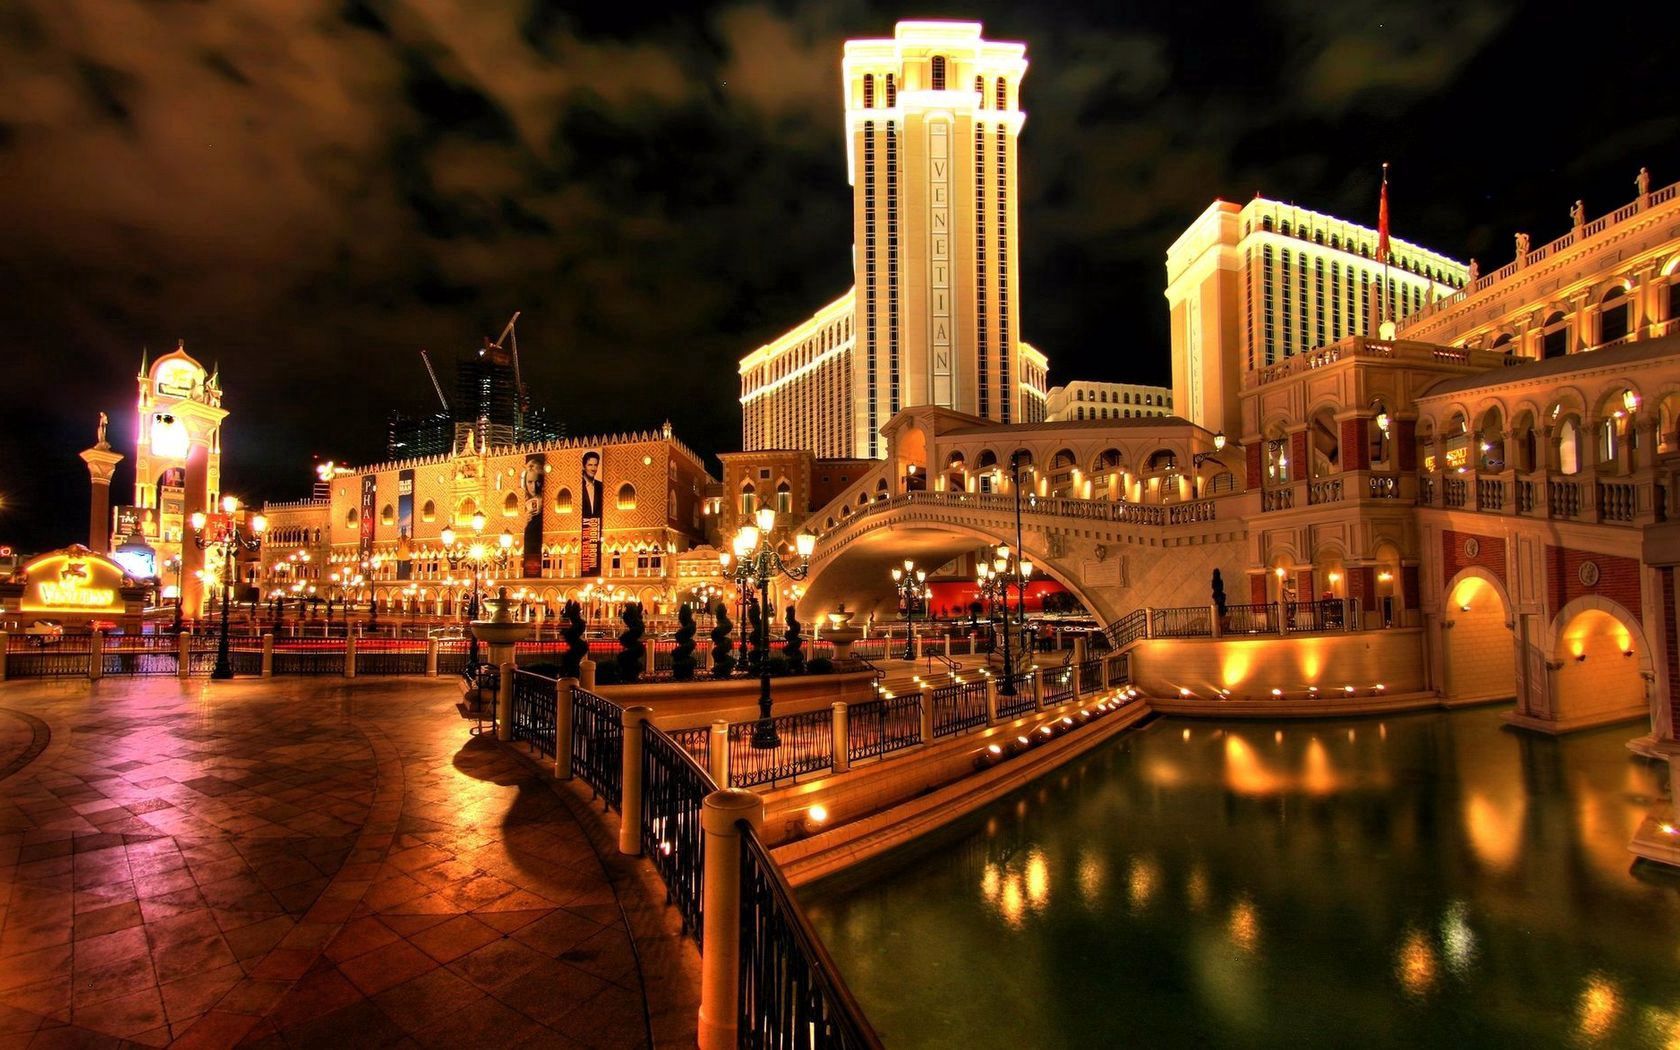 las vegas, brightly, venice, cities, water, night, city, lights, reflection, bridge, handsomely, it's beautiful, burn, hotel, are burning